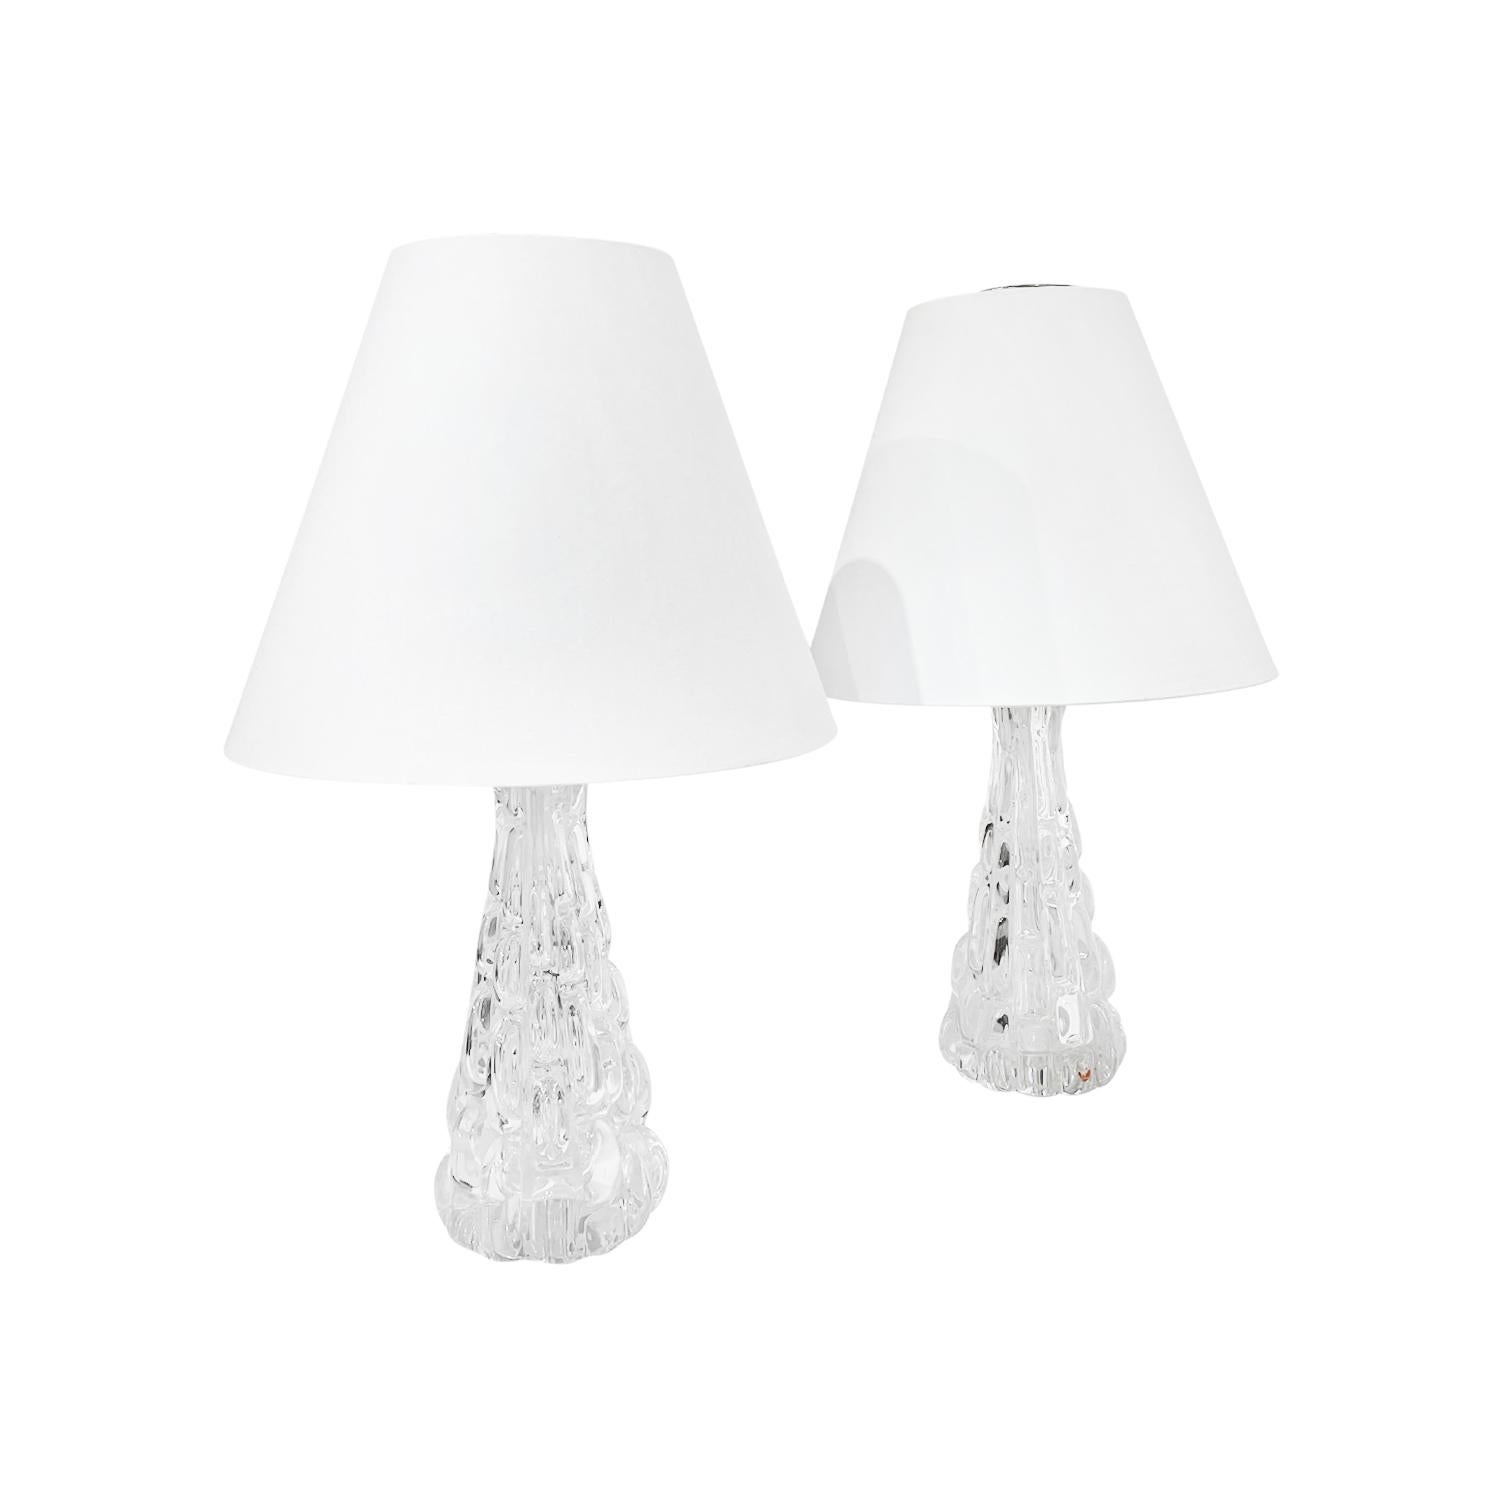 A vintage Mid-Century Modern Swedish pair of table lamps with a new white round shade, made of hand blown clear Orrefors glass, designed by Carl Fagerlund and produced, signed by Orrefors in good condition. The Scandinavian desk lights are enhanced